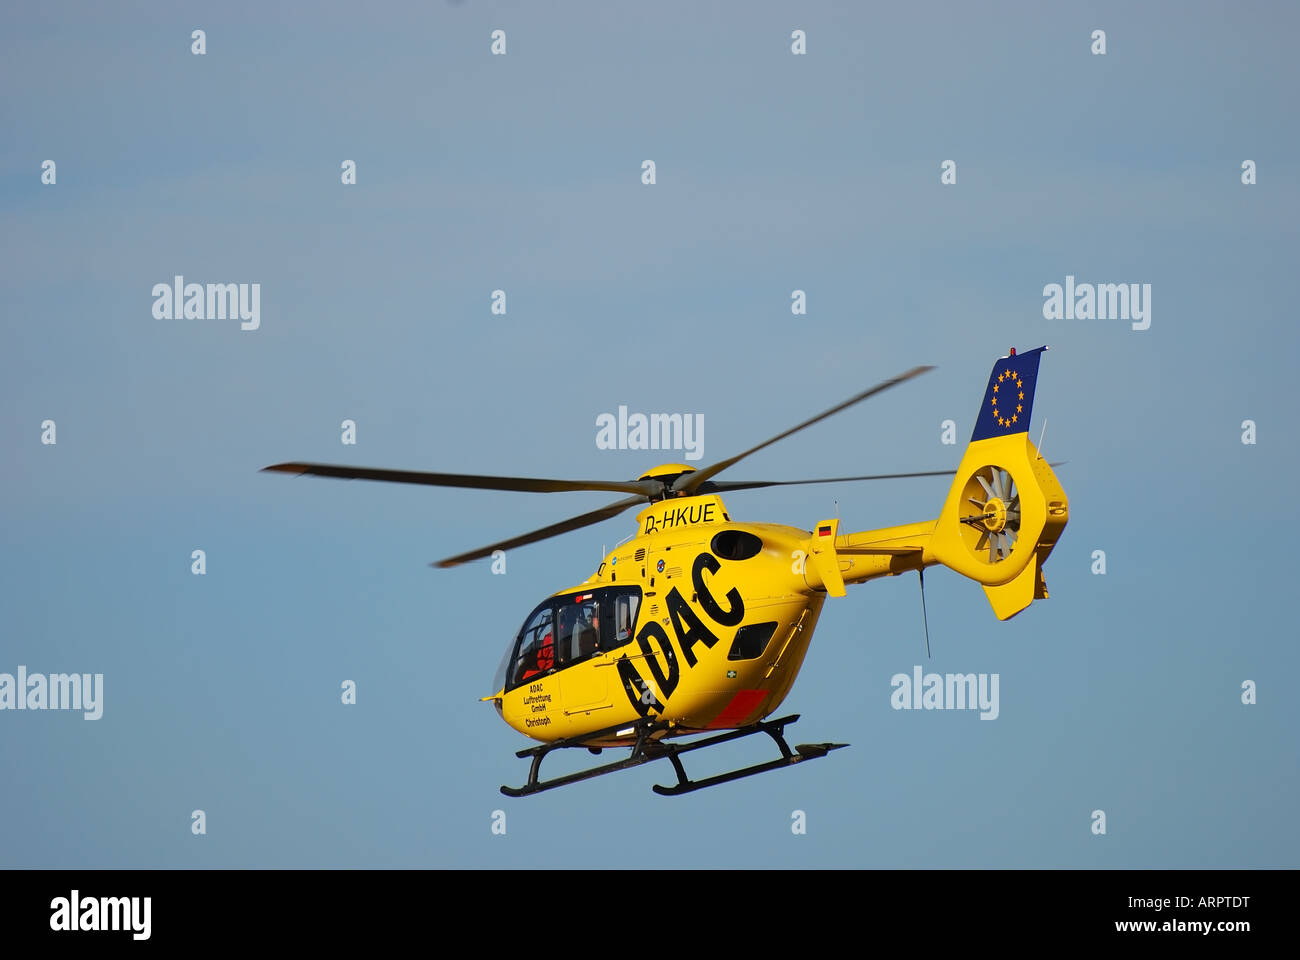 ADAC helicopter, Germany Stock Photo